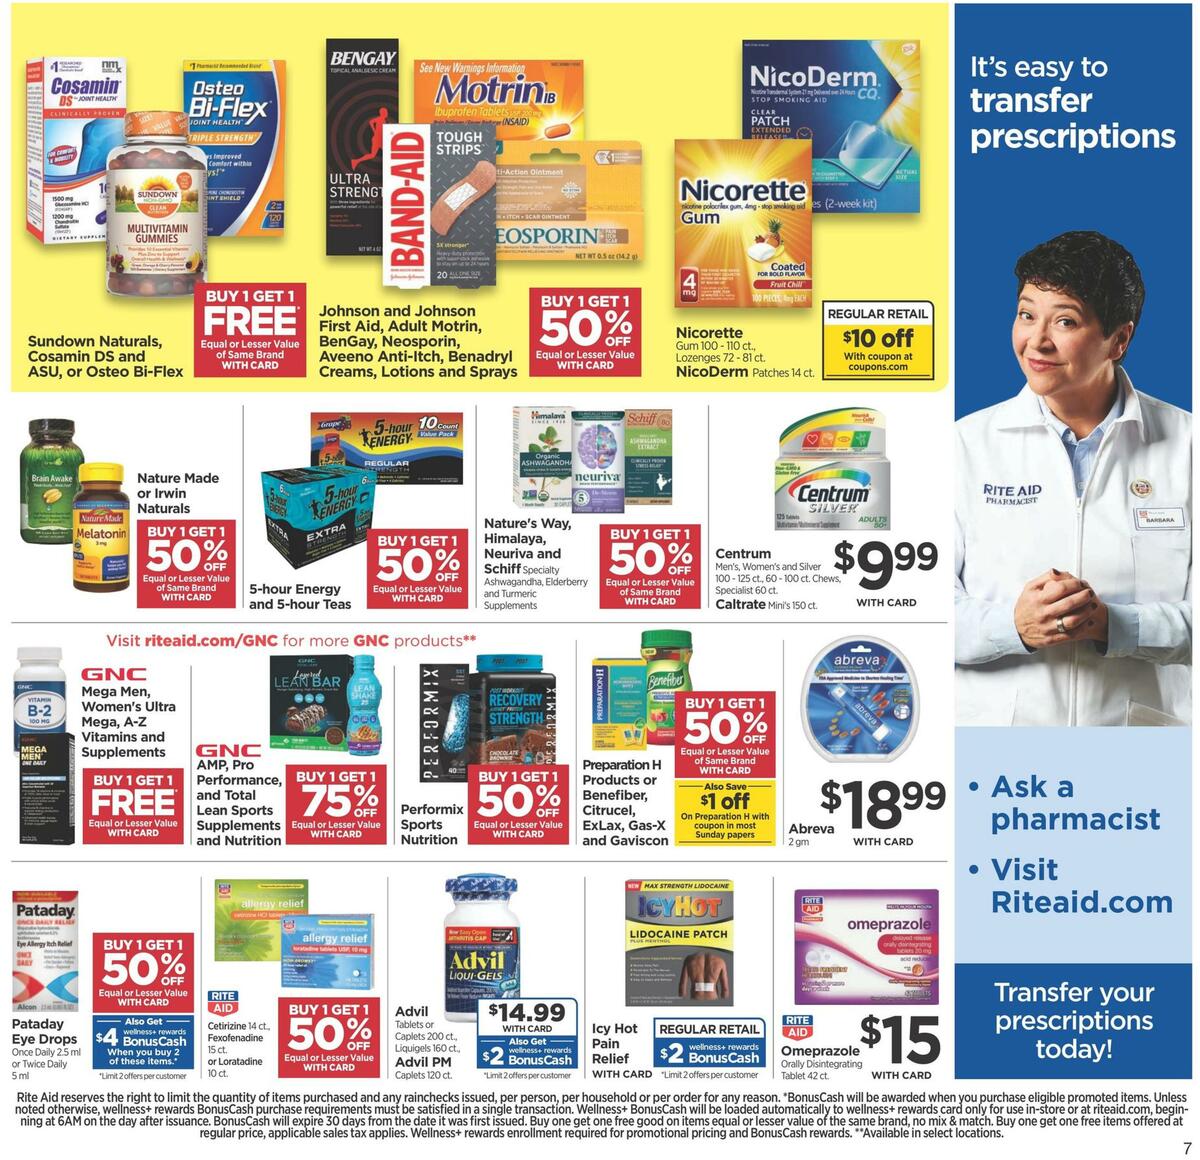 Rite Aid Weekly Ad from June 28